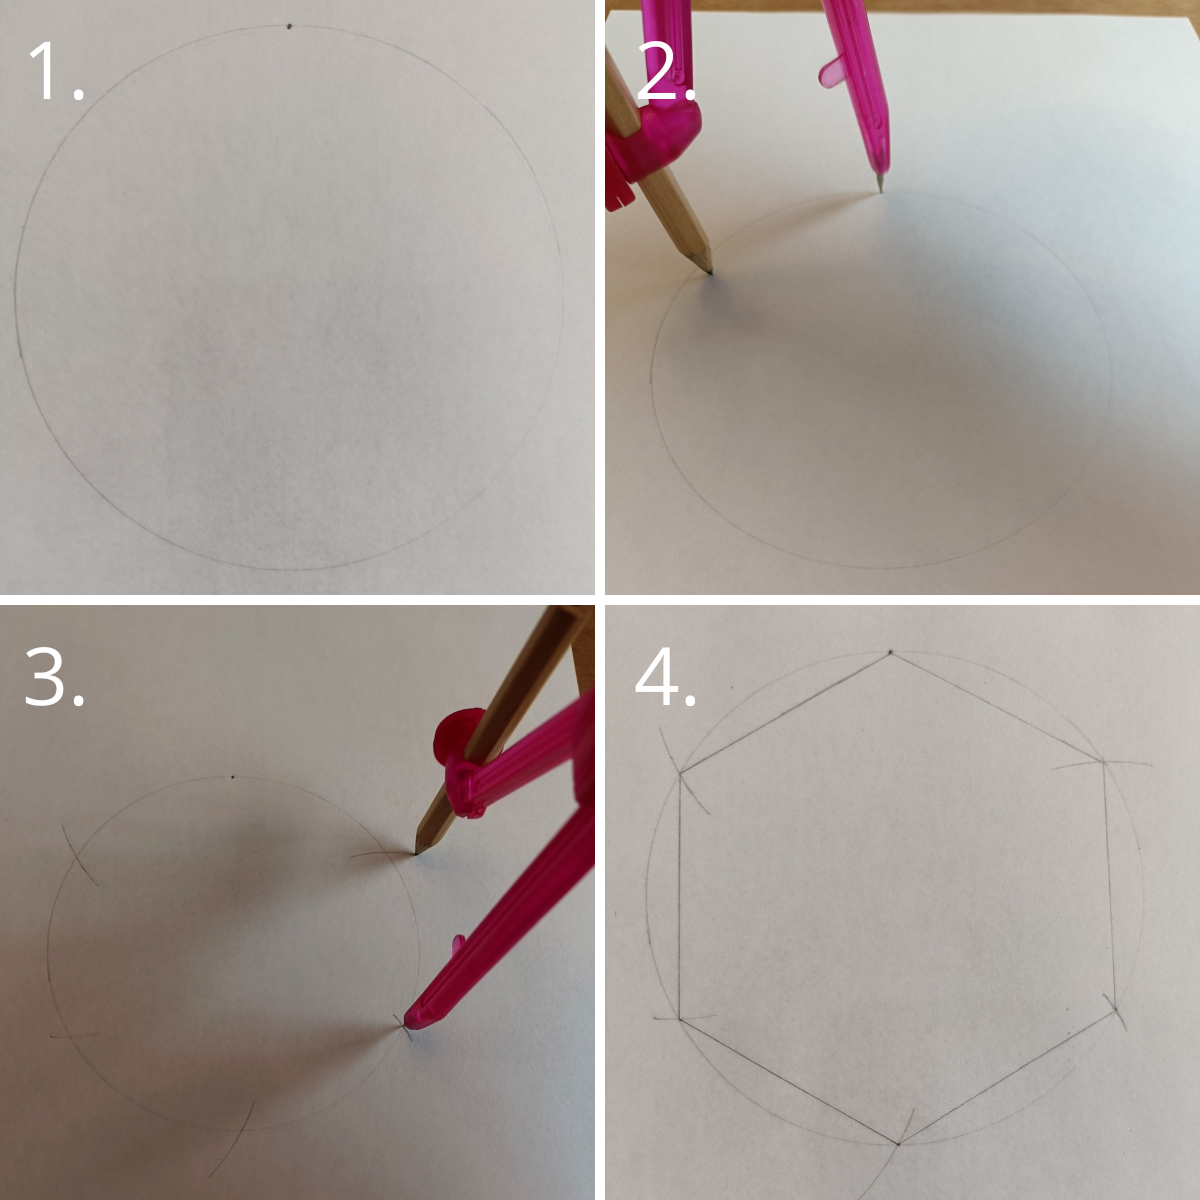 Making Equidistant Marks Around the Circle